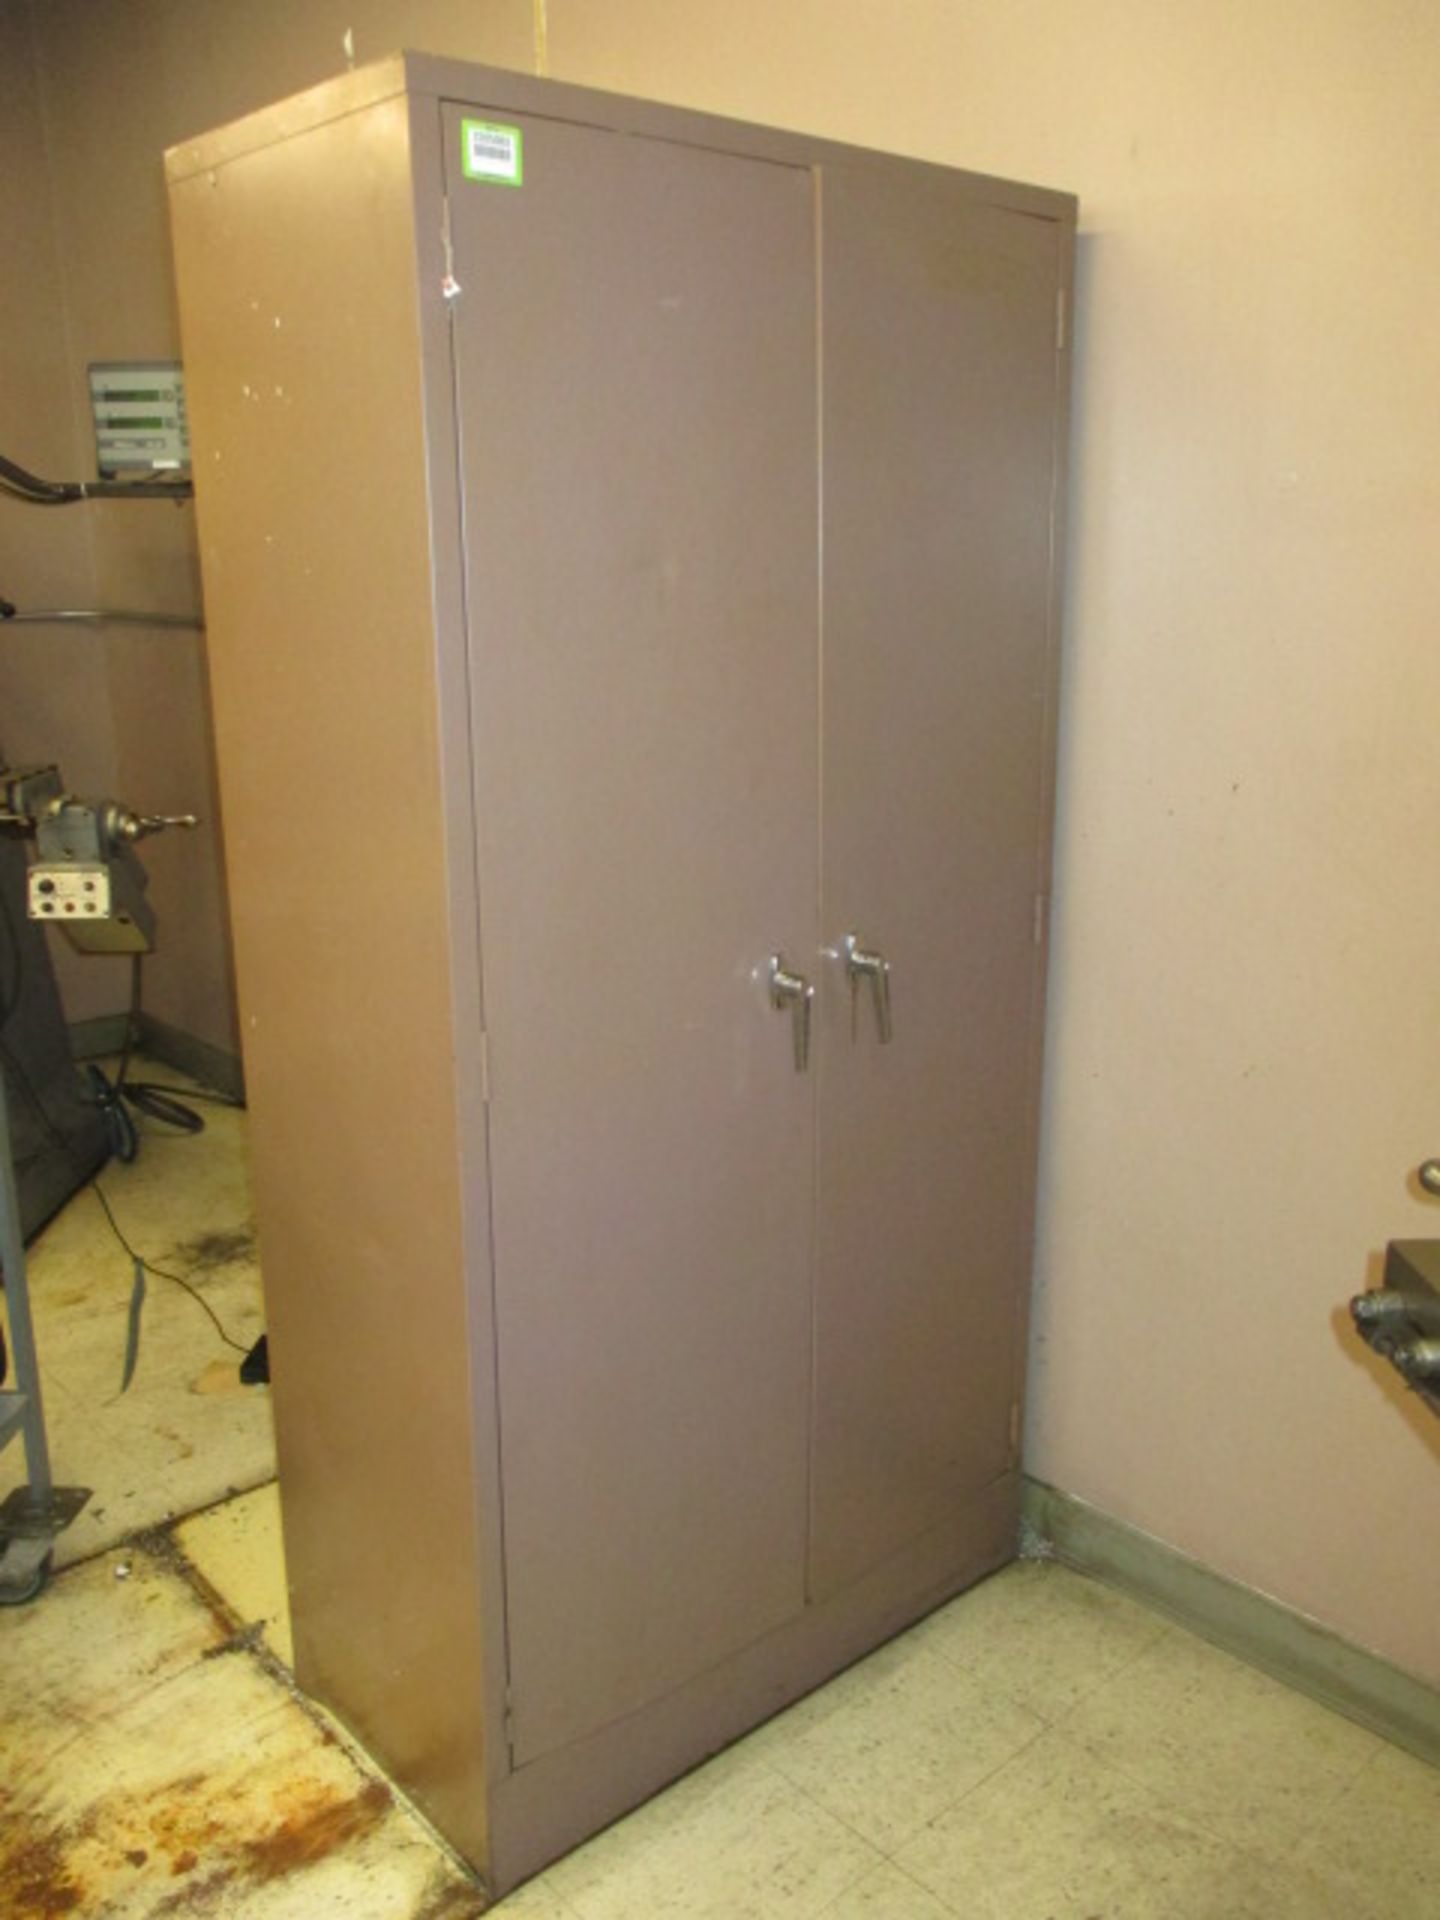 Storage Cabinet. Storage Cabinet w/ Misc Tooling. HIT# 2205883. Main Room. Asset Located at 859 Ward